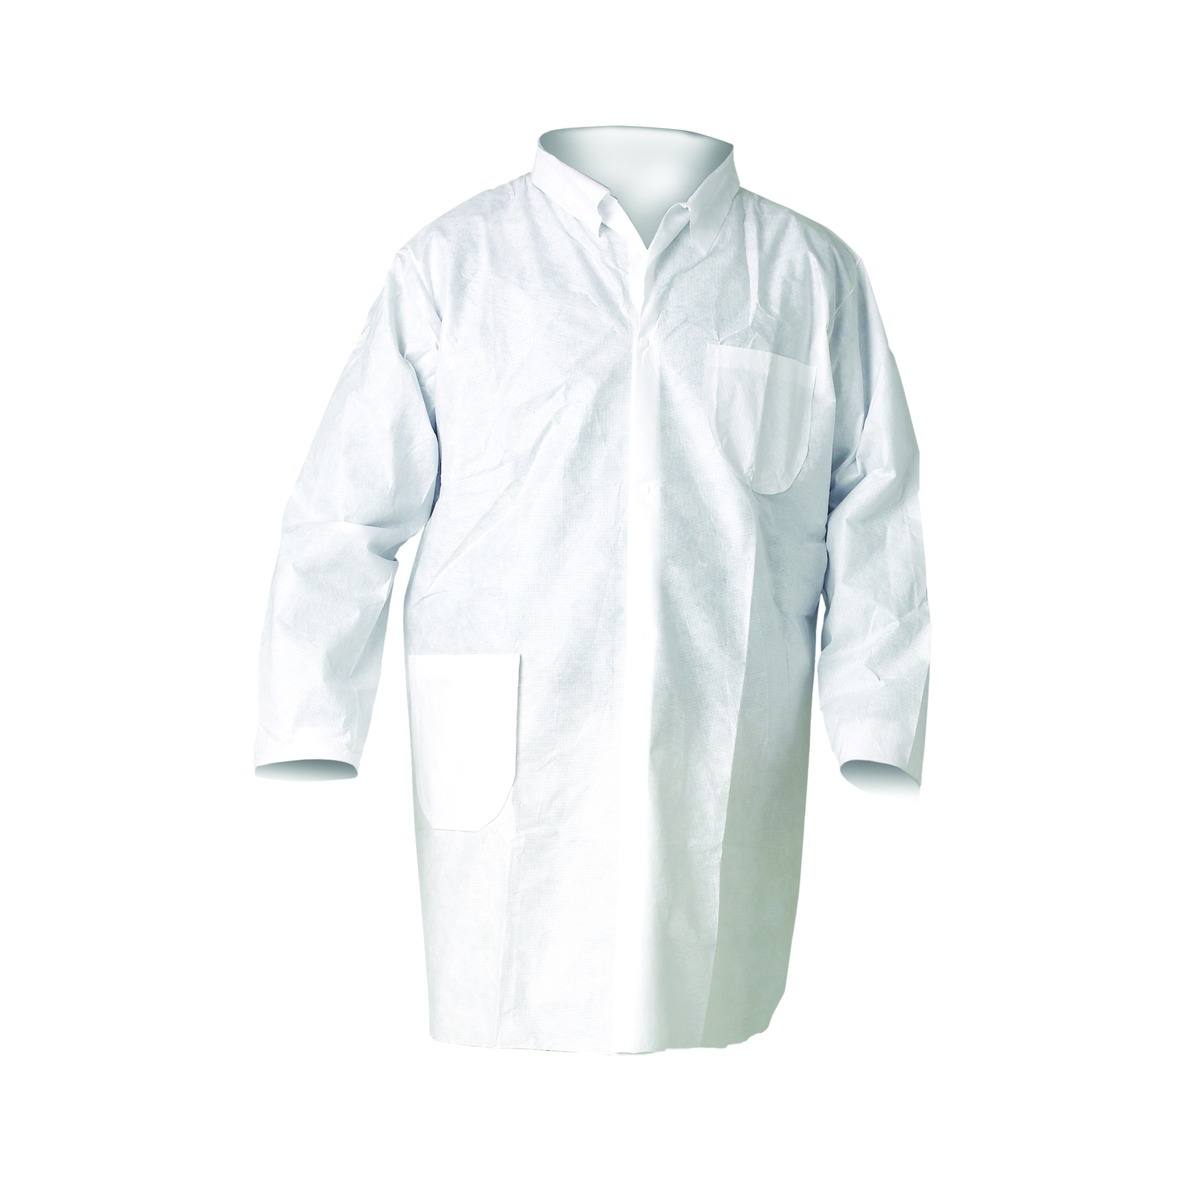 Kimberly-Clark Professional™ 2X White KleenGuard™ A20 SMS Disposable Lab Coat (Availability restrictions apply.)